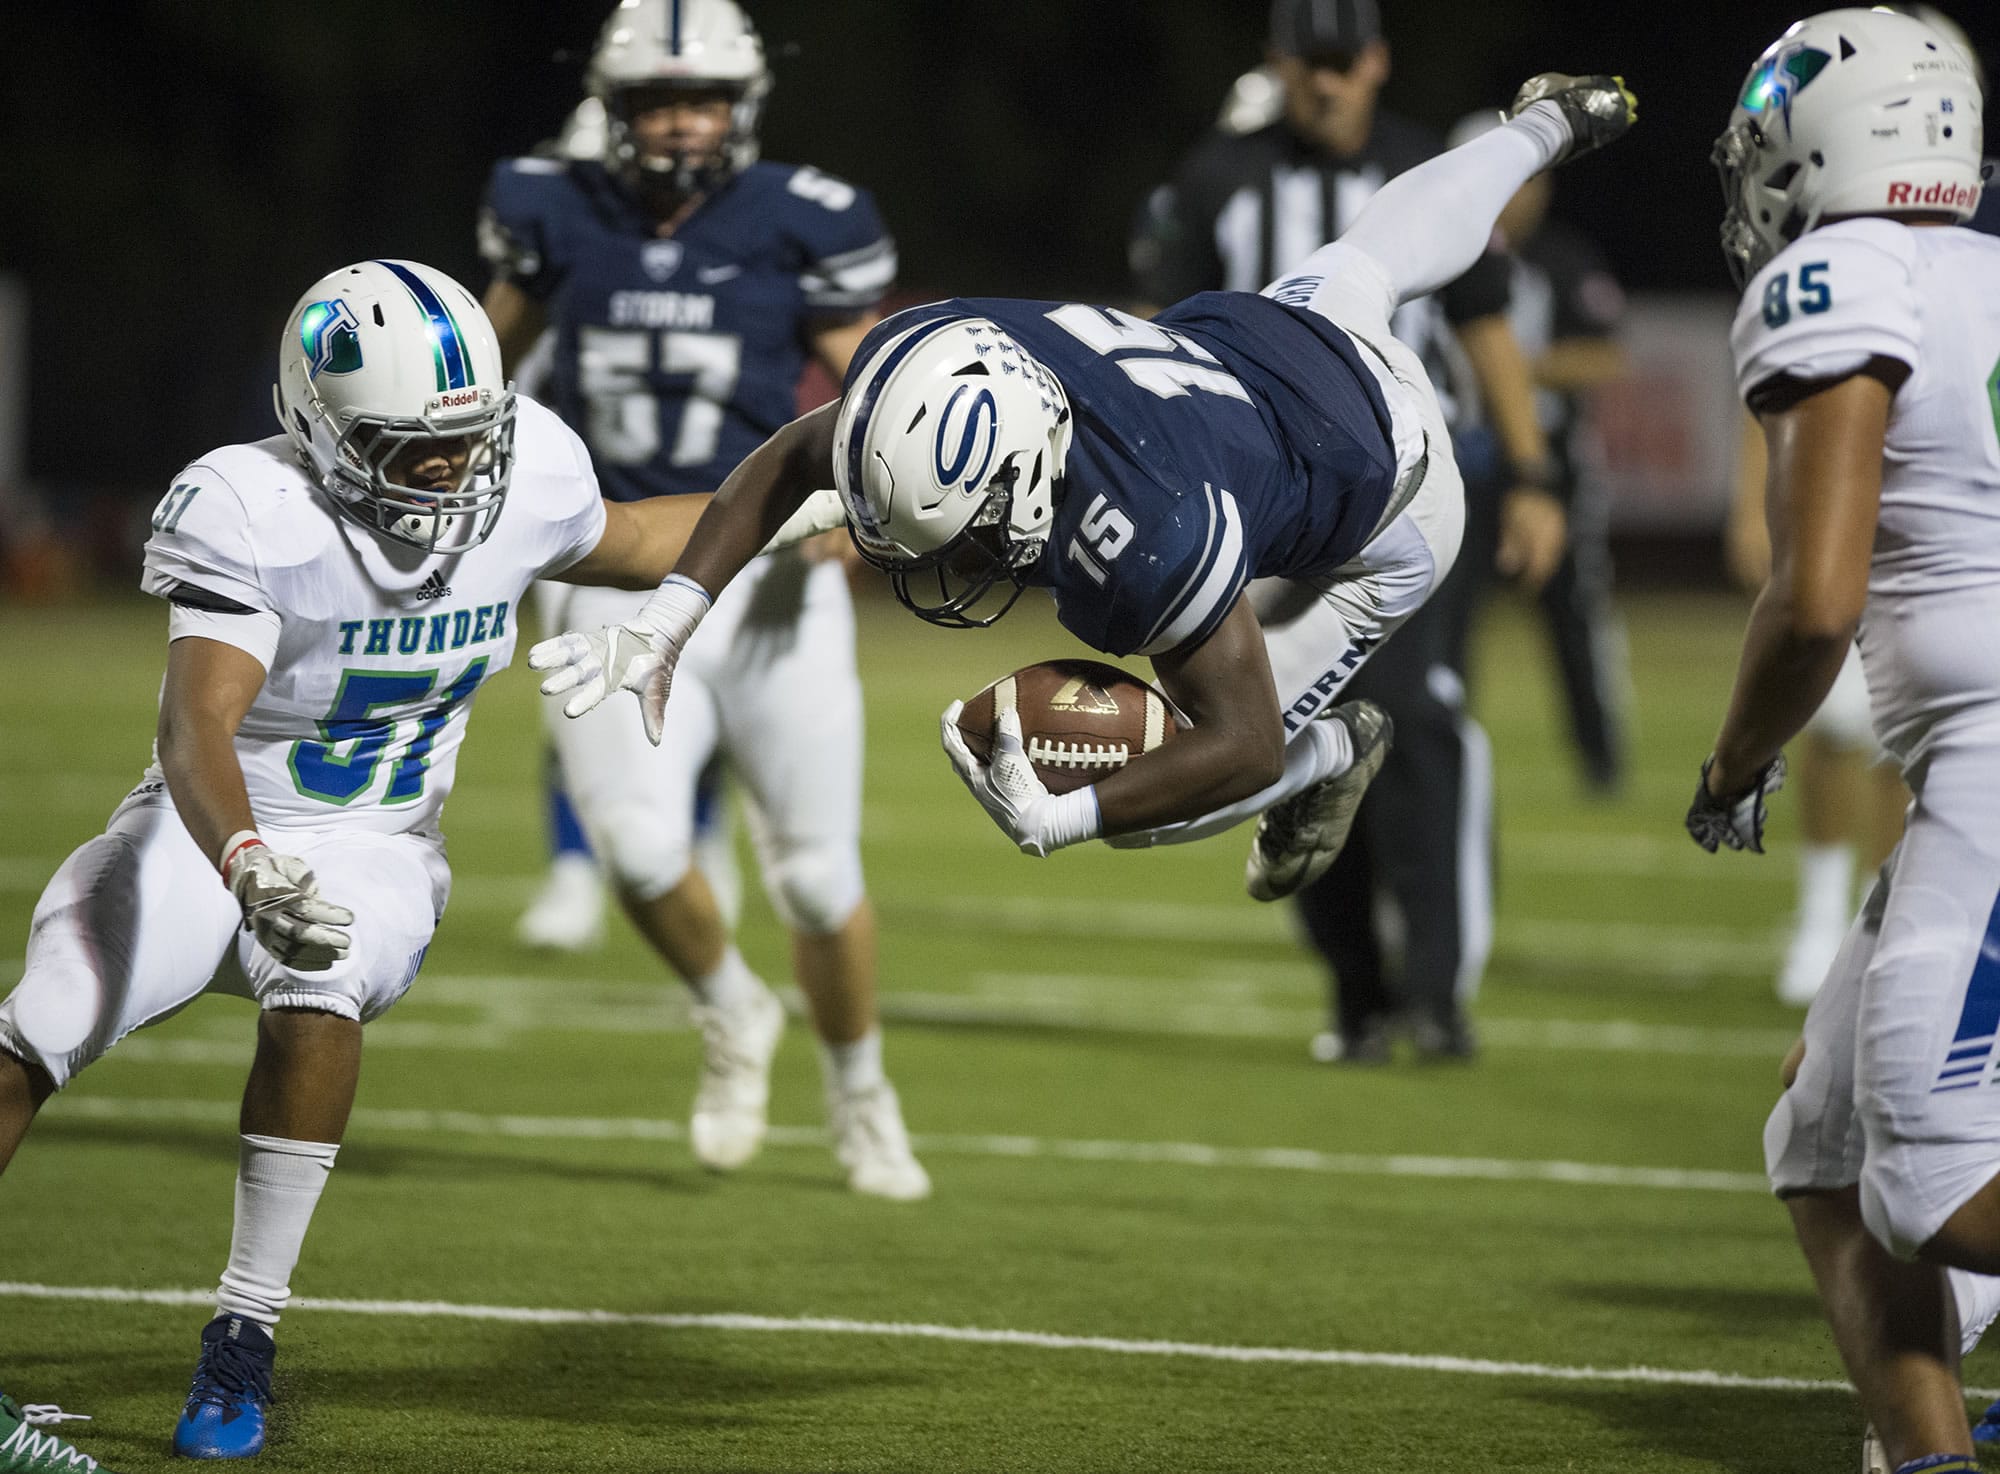 Skyview’s Jalynnee McGee (15) soars past Mountain View’s Kobe Anderson (51) during the first quarter at Kiggins Bowl in Vancouver, Friday September 22, 2017.